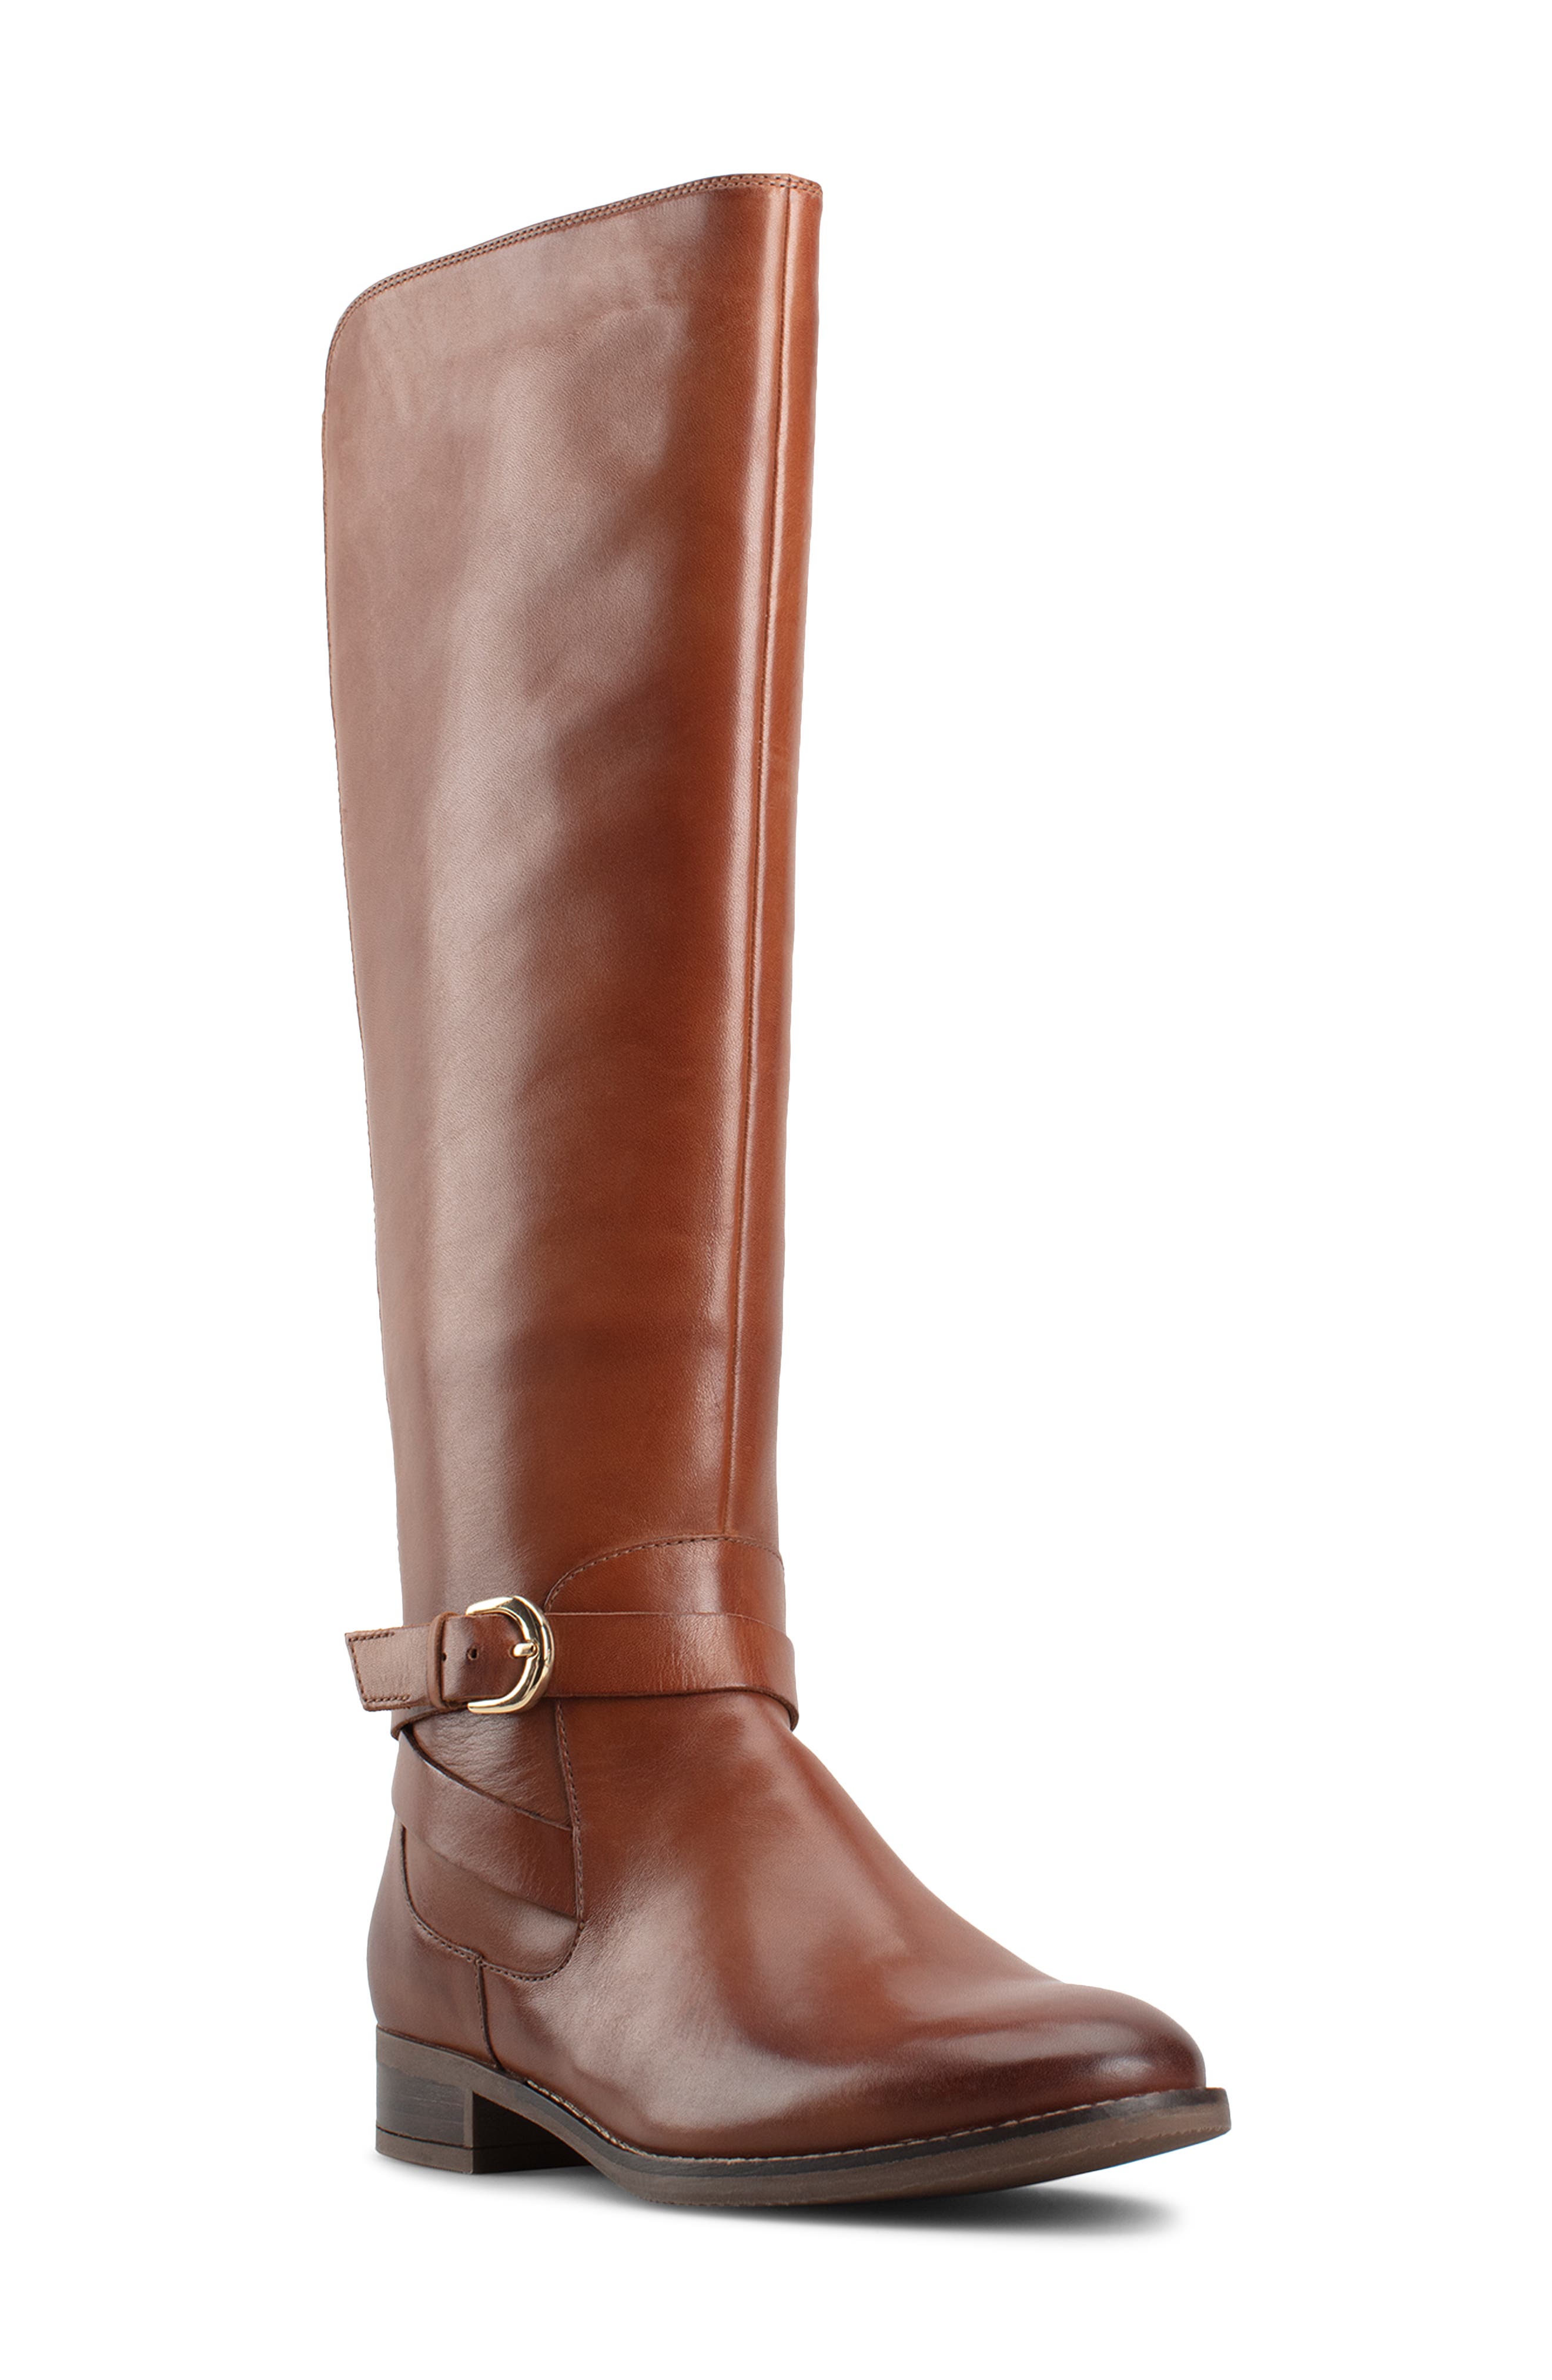 Riding Boots \u0026 Booties | Nordstrom